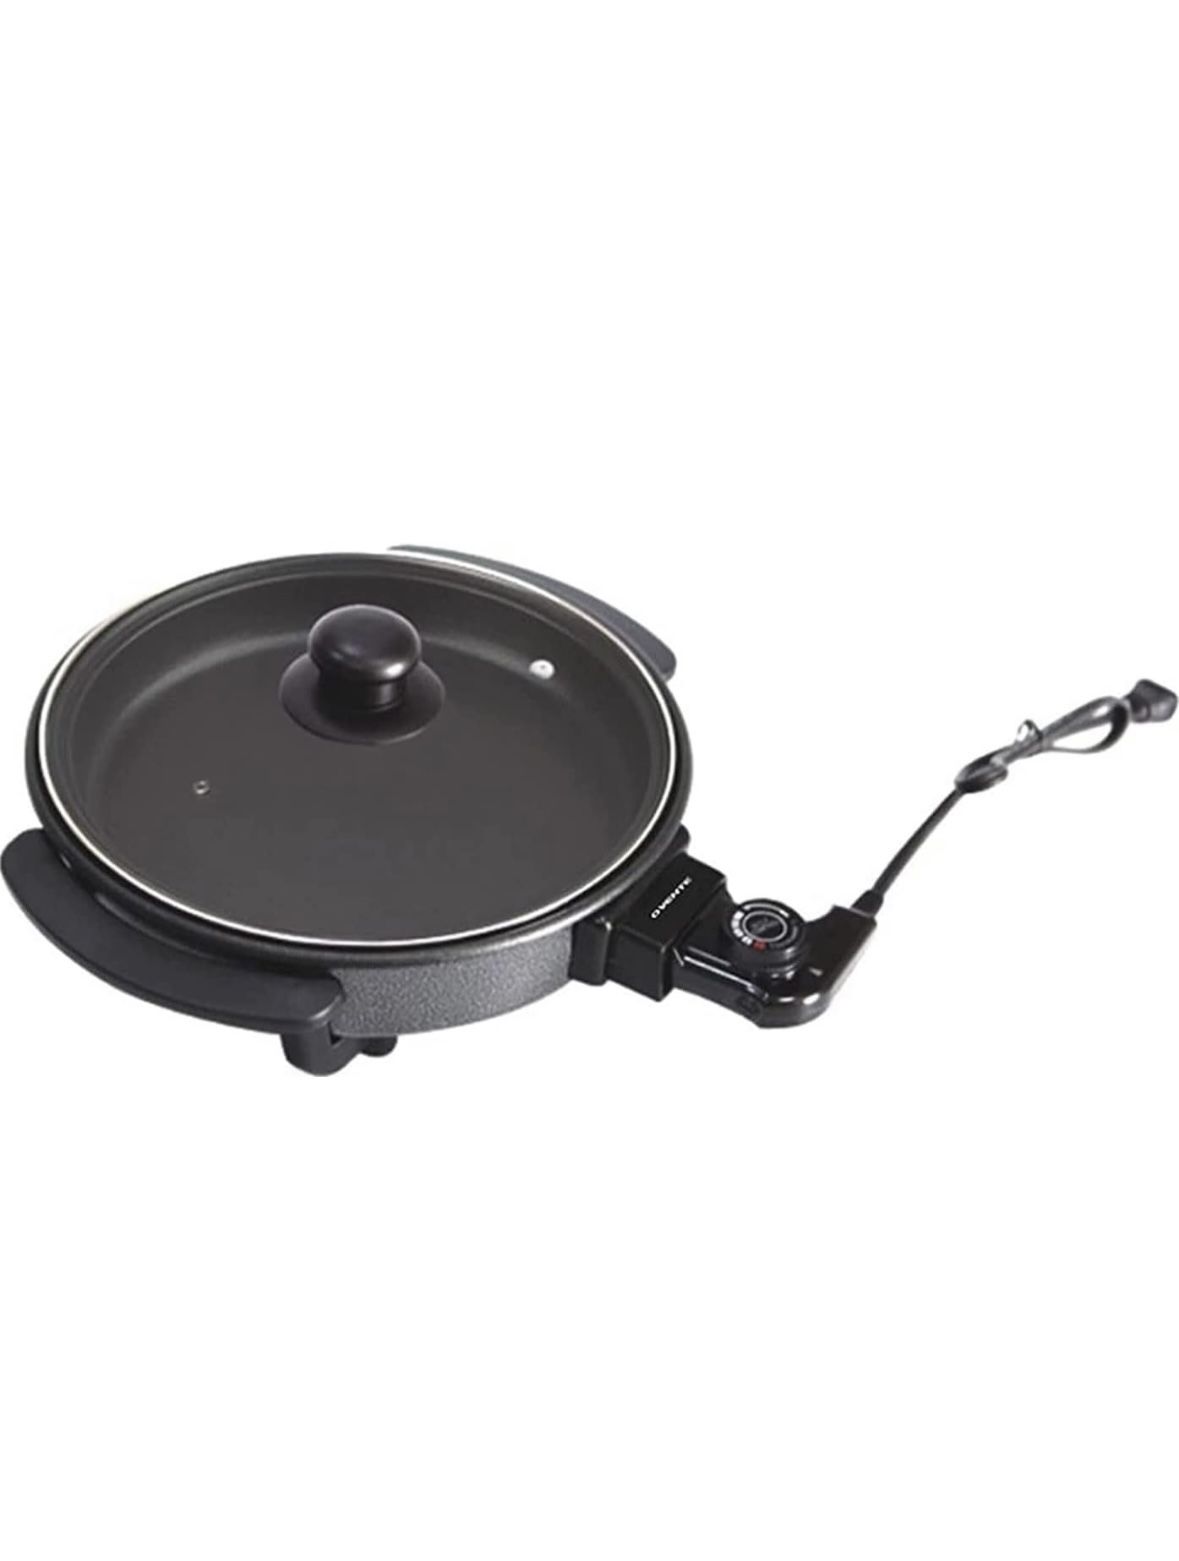 OVENTE  Round Electric Frying Pan, Black